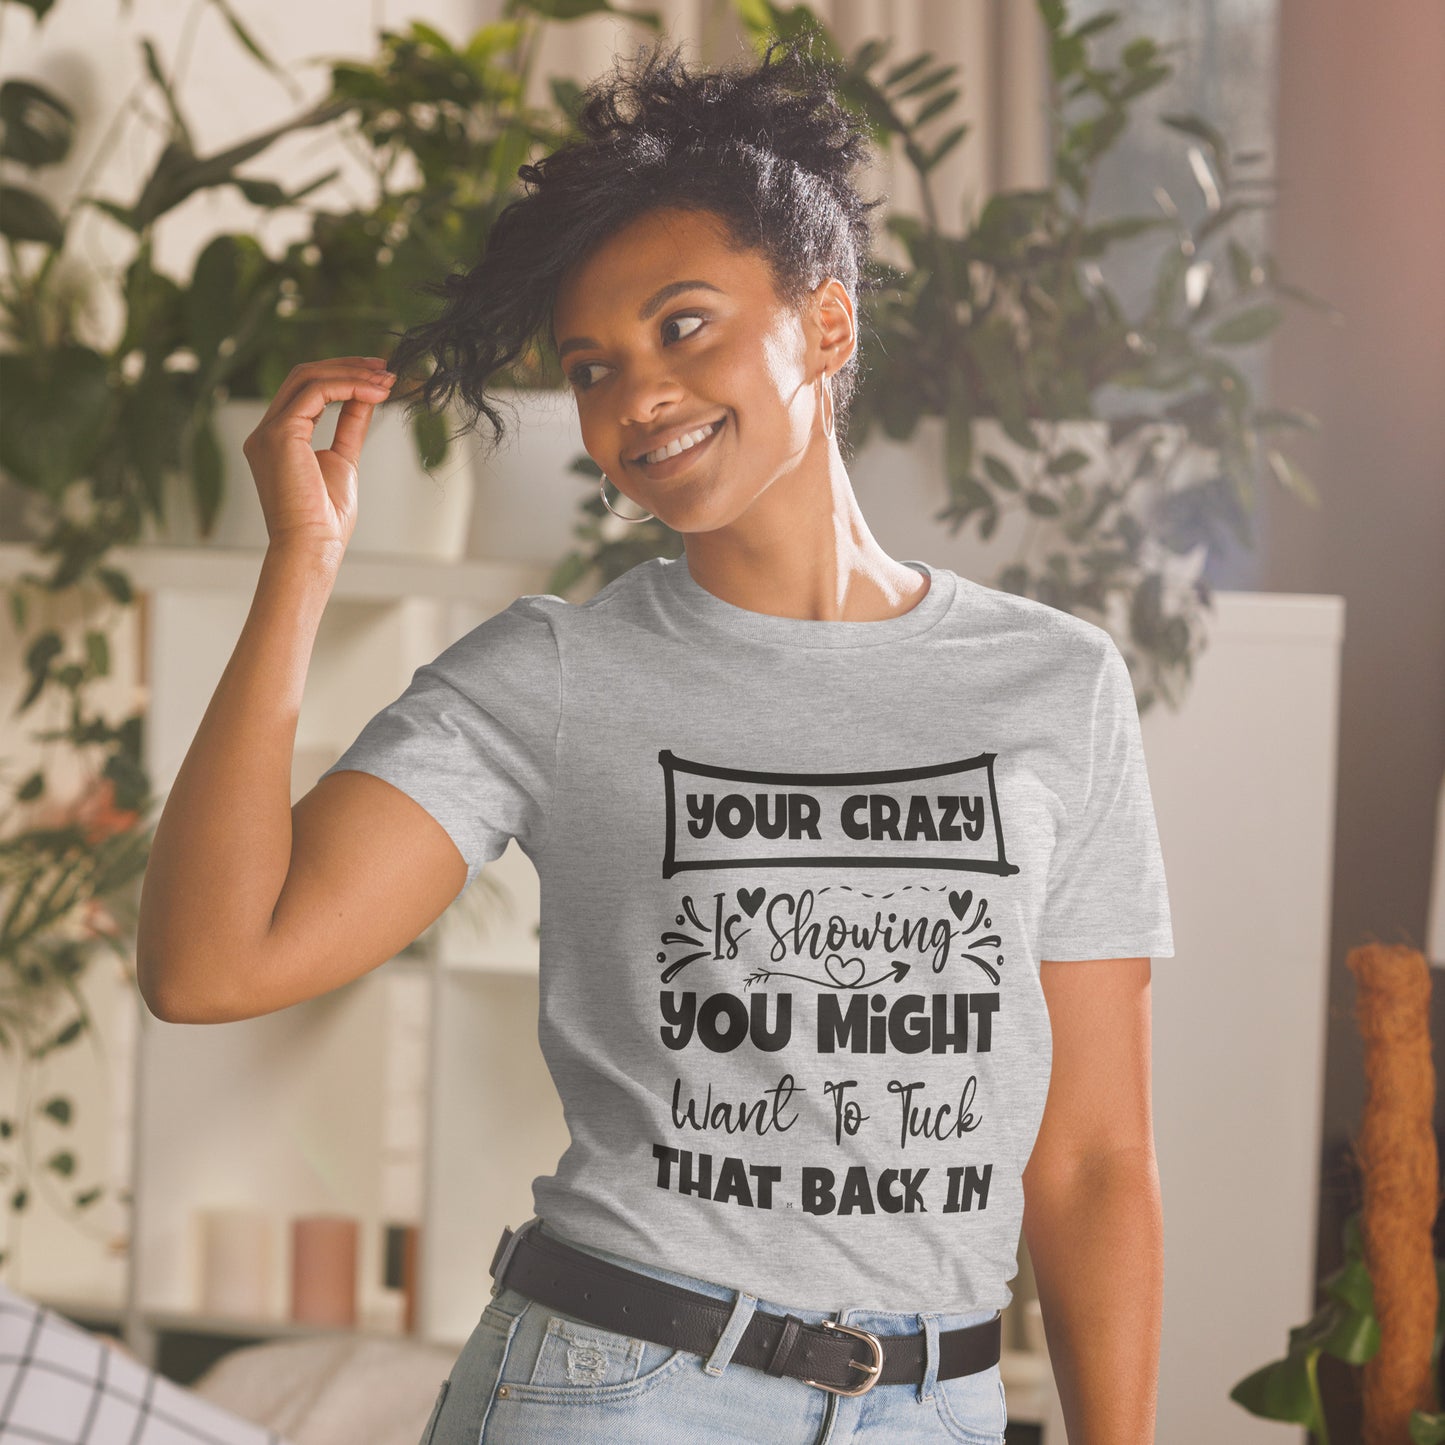 Your Crazy is Showing. You Might Want to Tuck That Back In. MII Designs Short-Sleeve Unisex T-Shirt